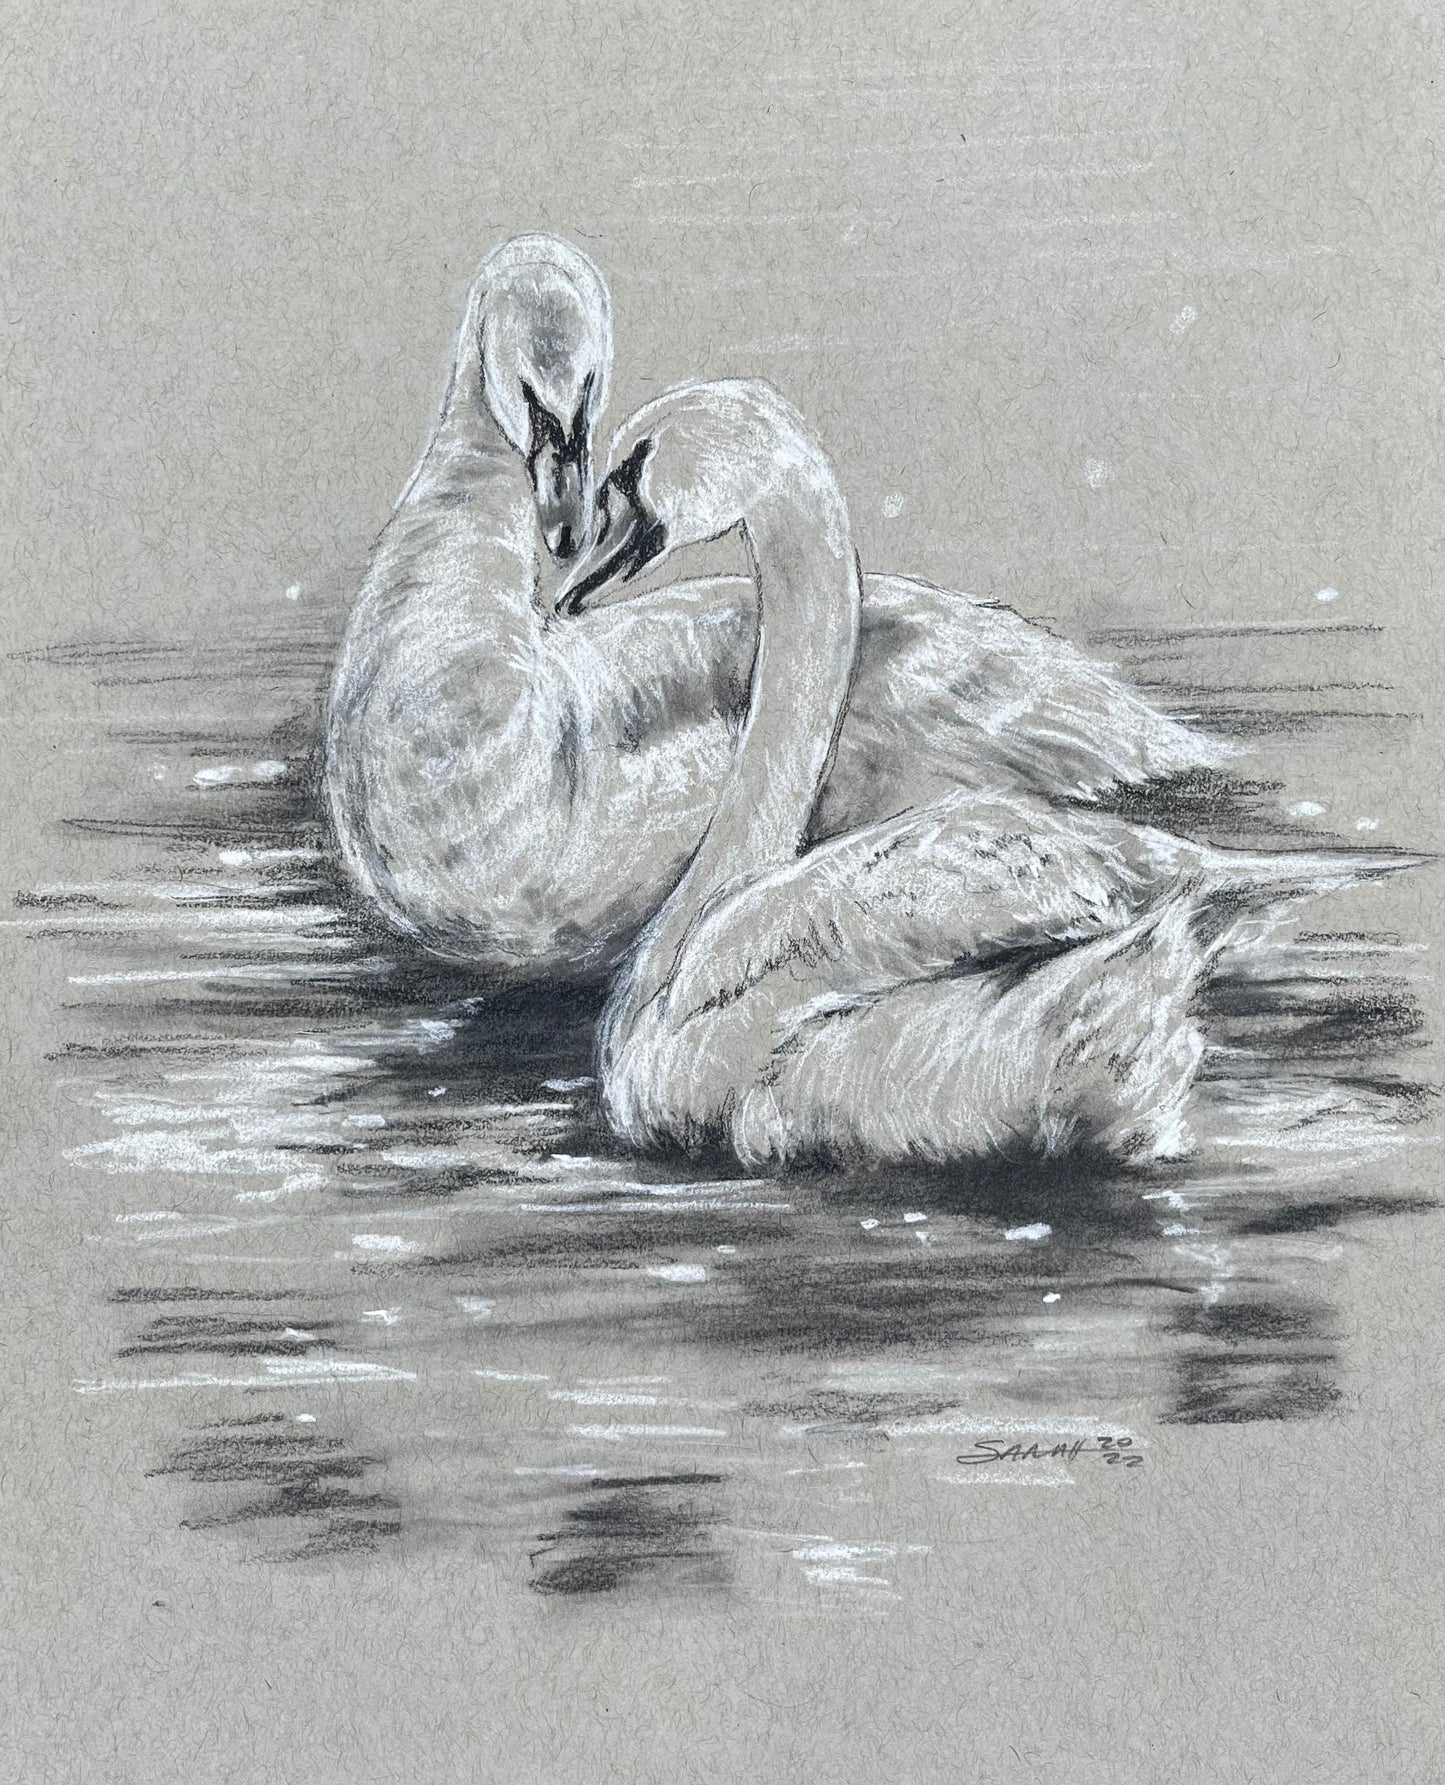 SWAN SKETCH 2 | 8x10 | CHARCOAL AND CHALK ON TONED PAPER